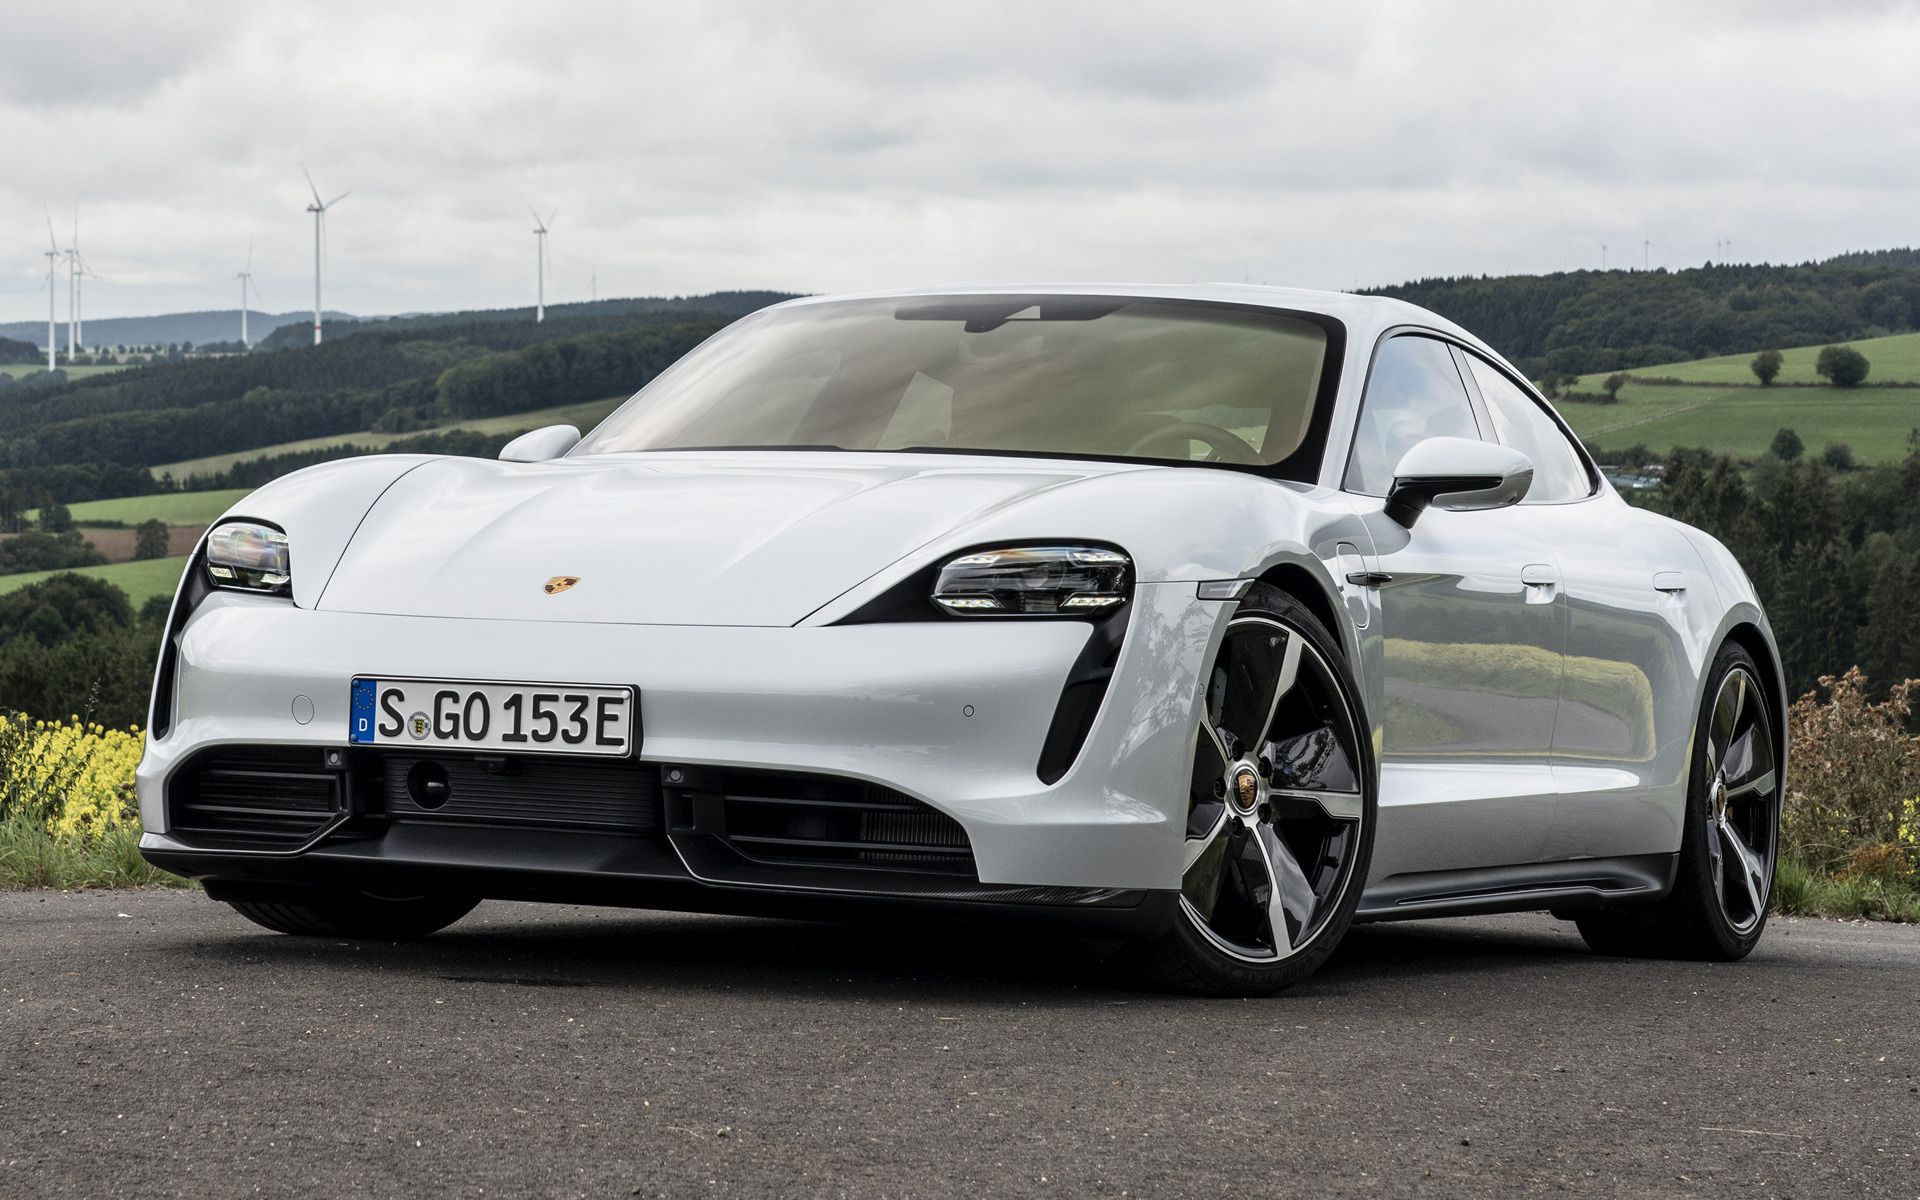 Porsche Taycan Turbo S and HD Image